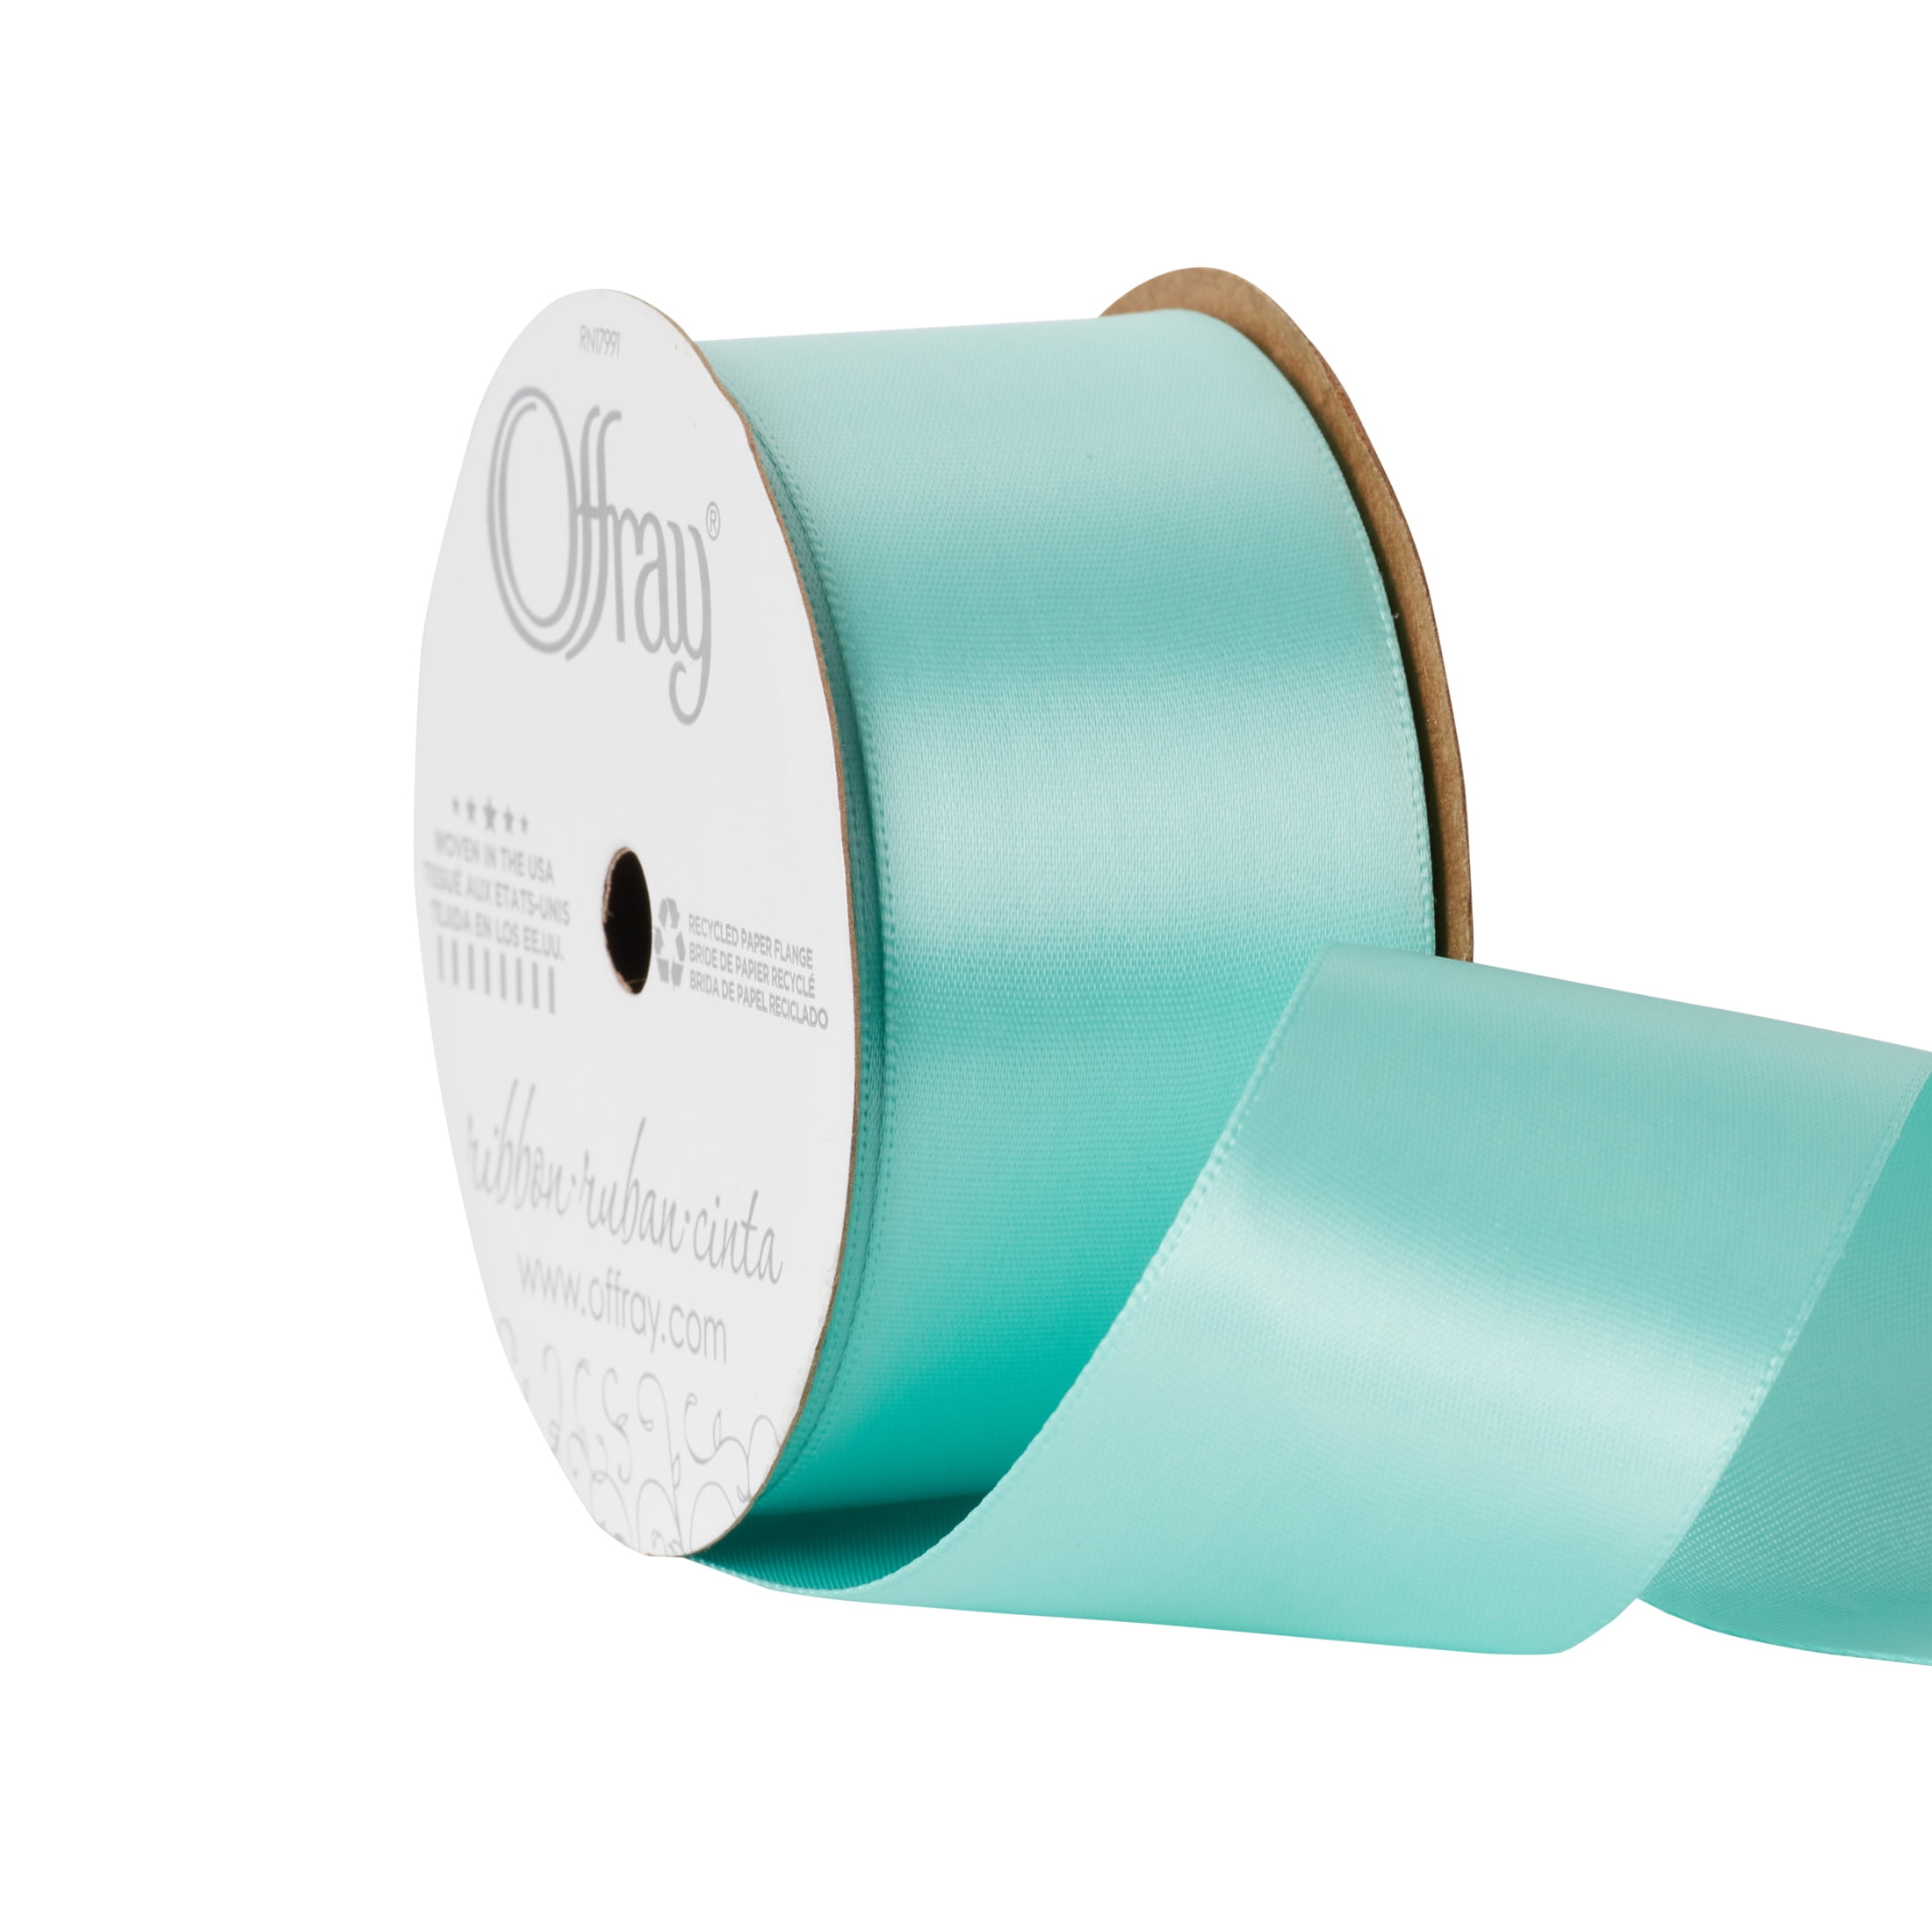 Turquoise Sheer Ribbon 2.4 x 50yds - Fisch Floral Supply